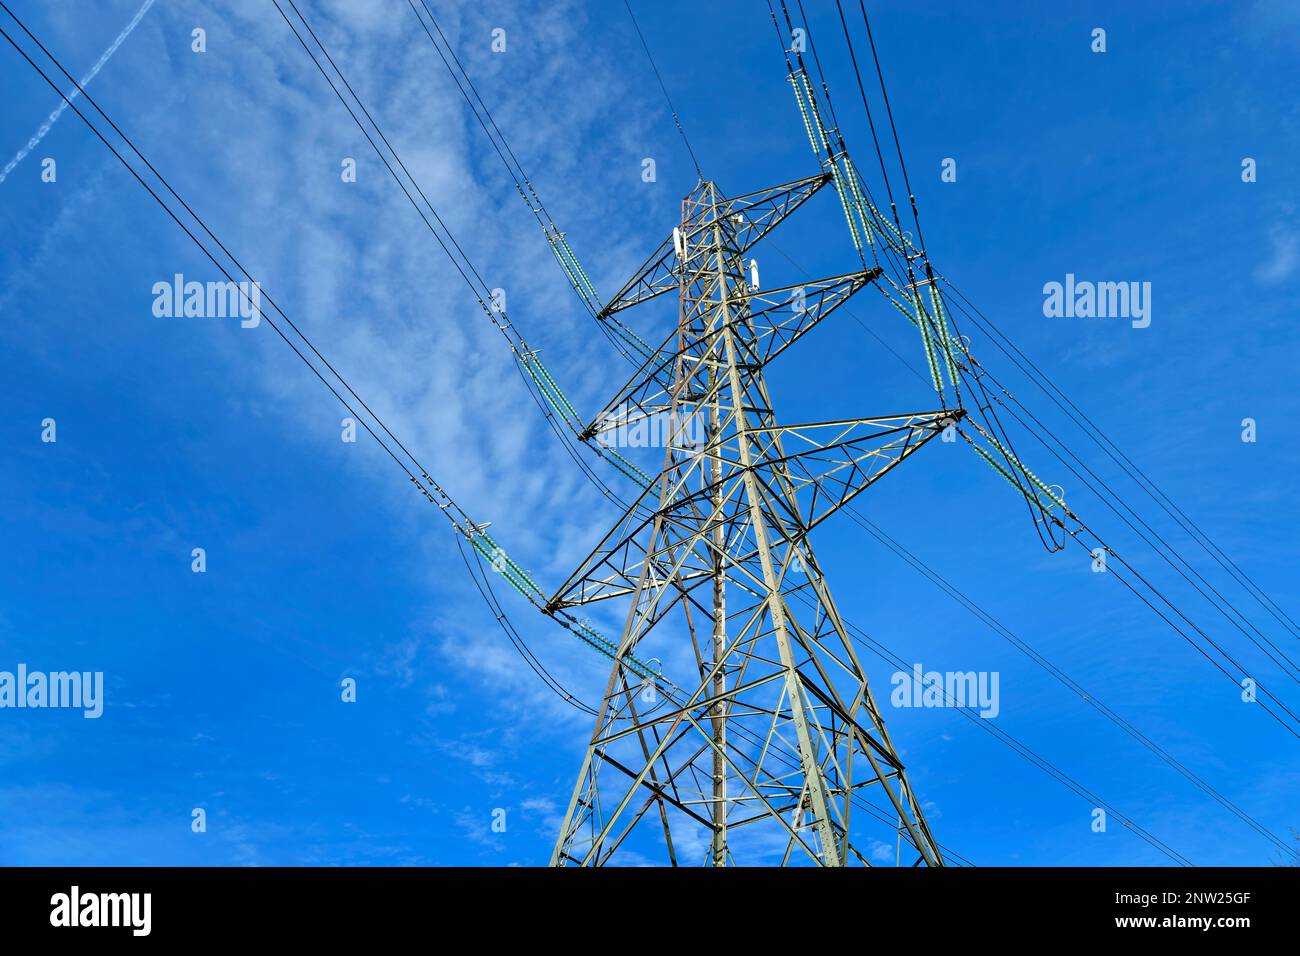 Electricity high voltage cables and pylons. Stock Photo